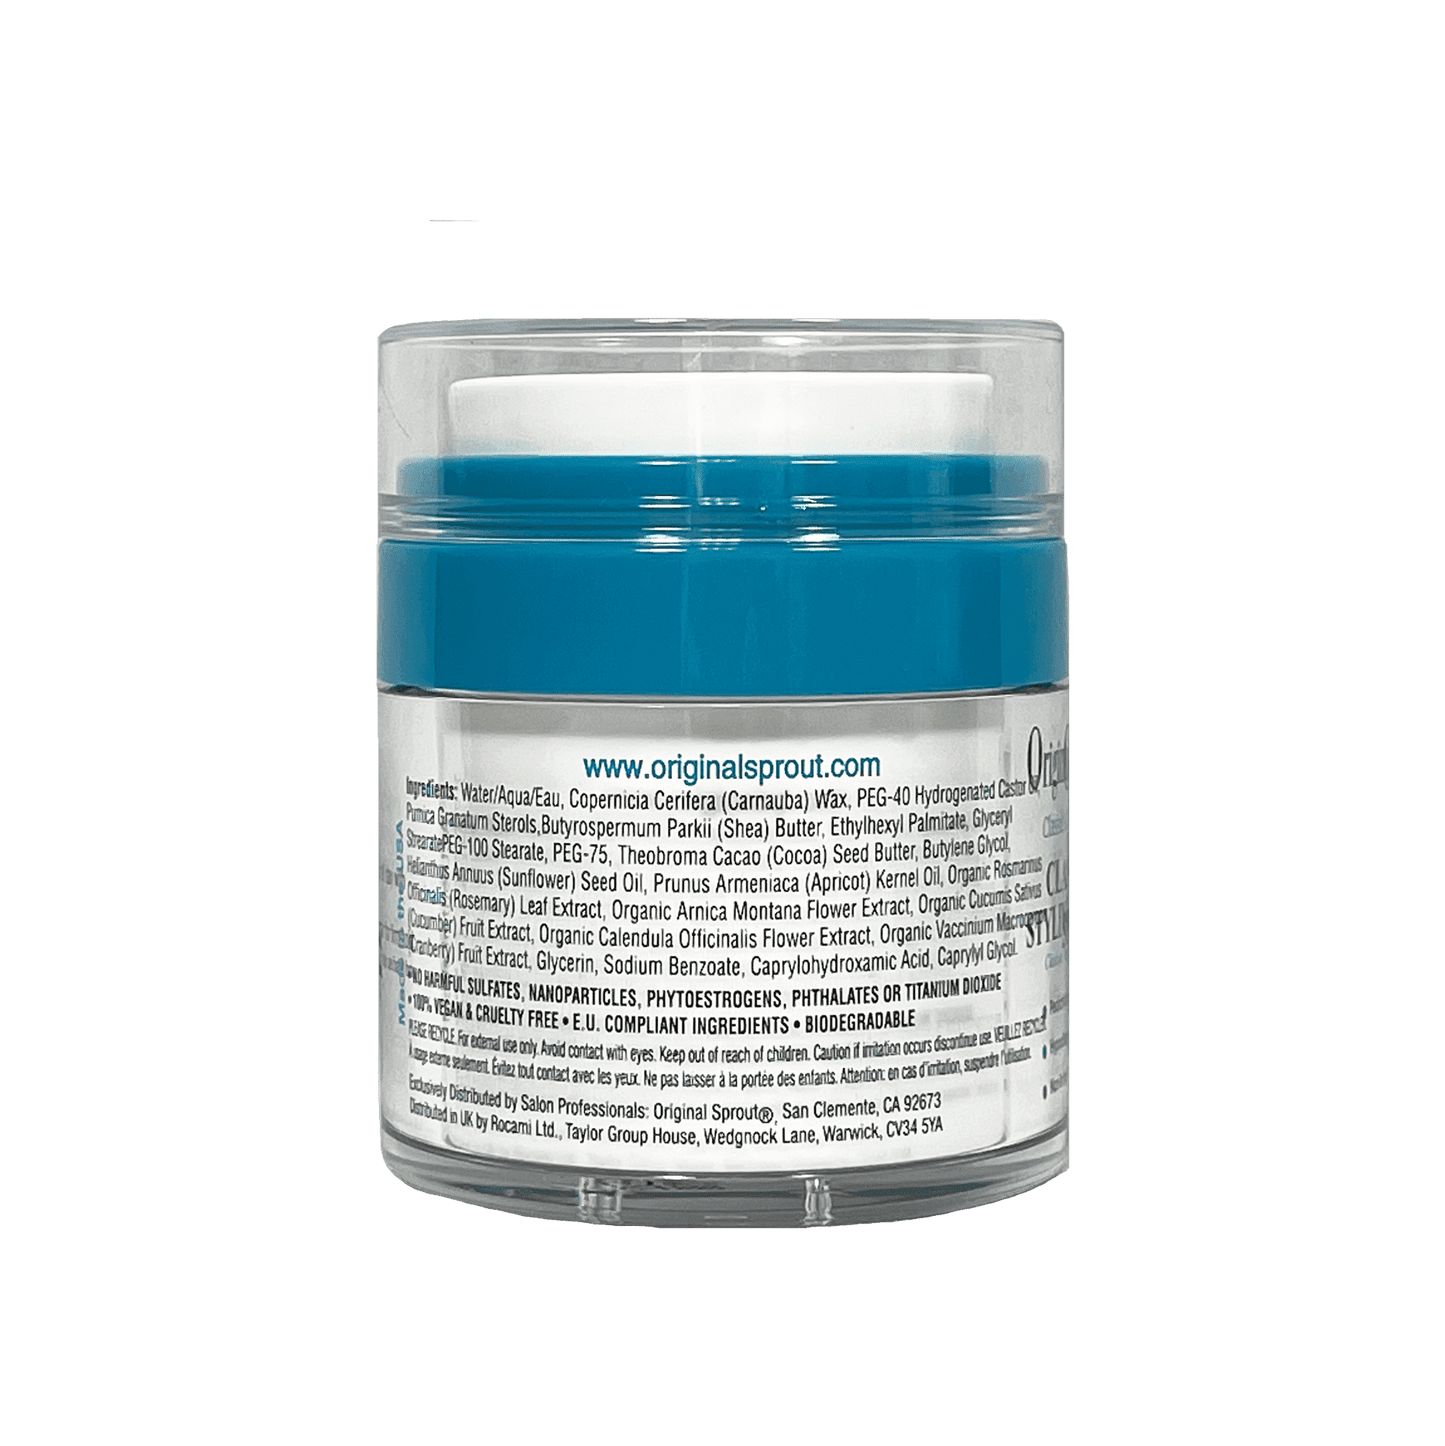 Original Sprout Classic Styling Balm 1.7oz